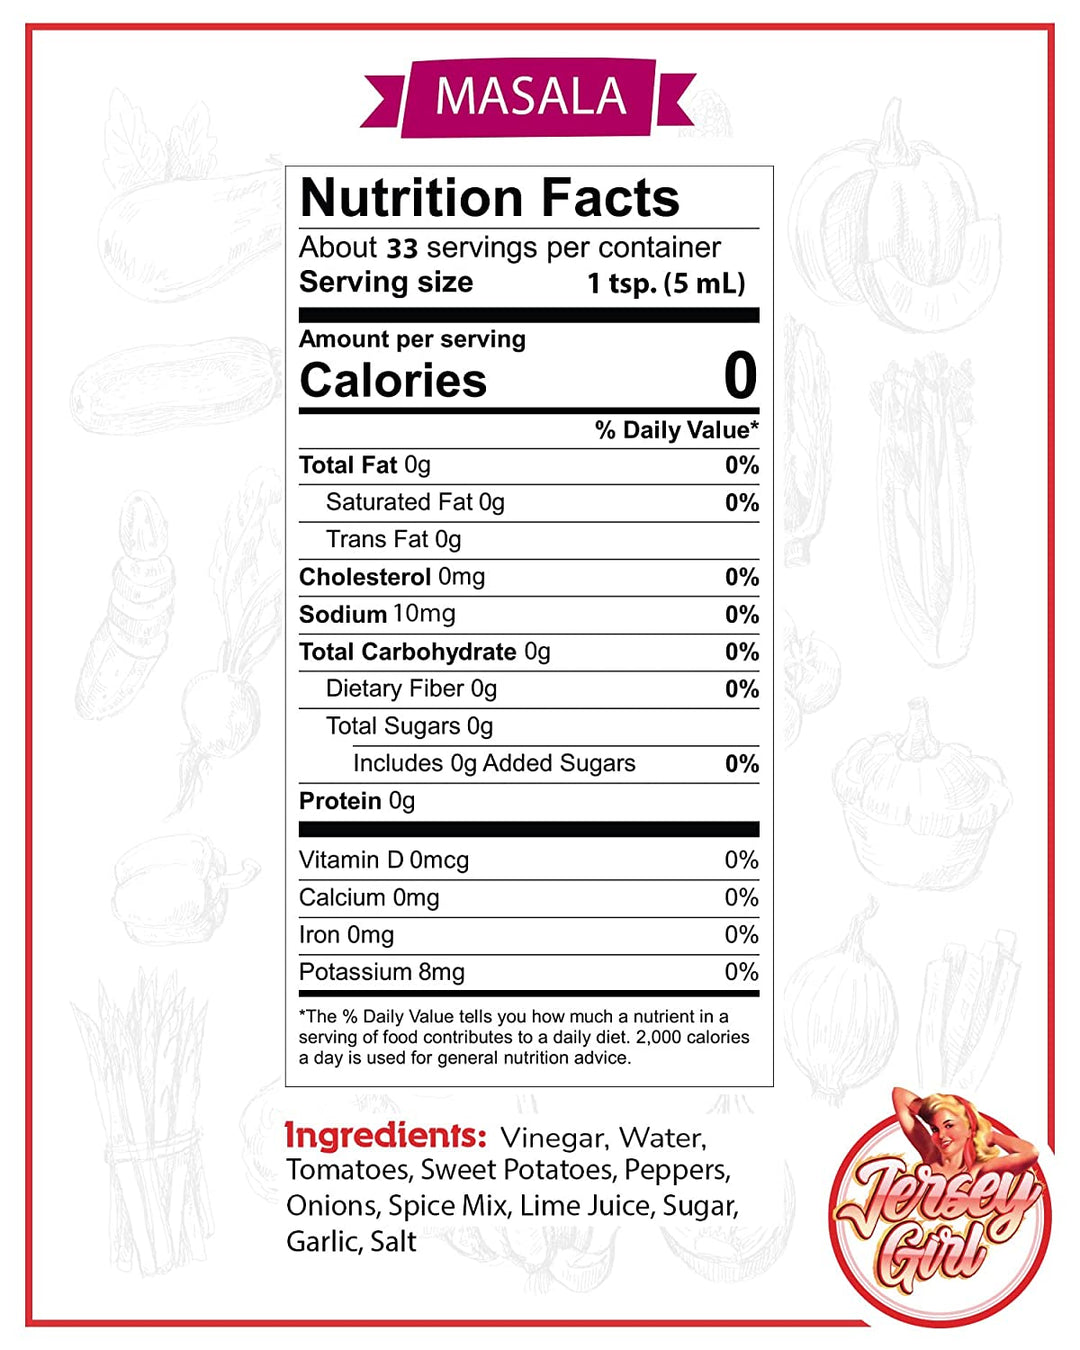 Medium Classic Nutrition Label  Vinegar, Water, Tomatoes, Sweet Potatoes, Peppers, Onions, Lime Juice, Sugar, Garlic, Salt, Indian Spice Mix